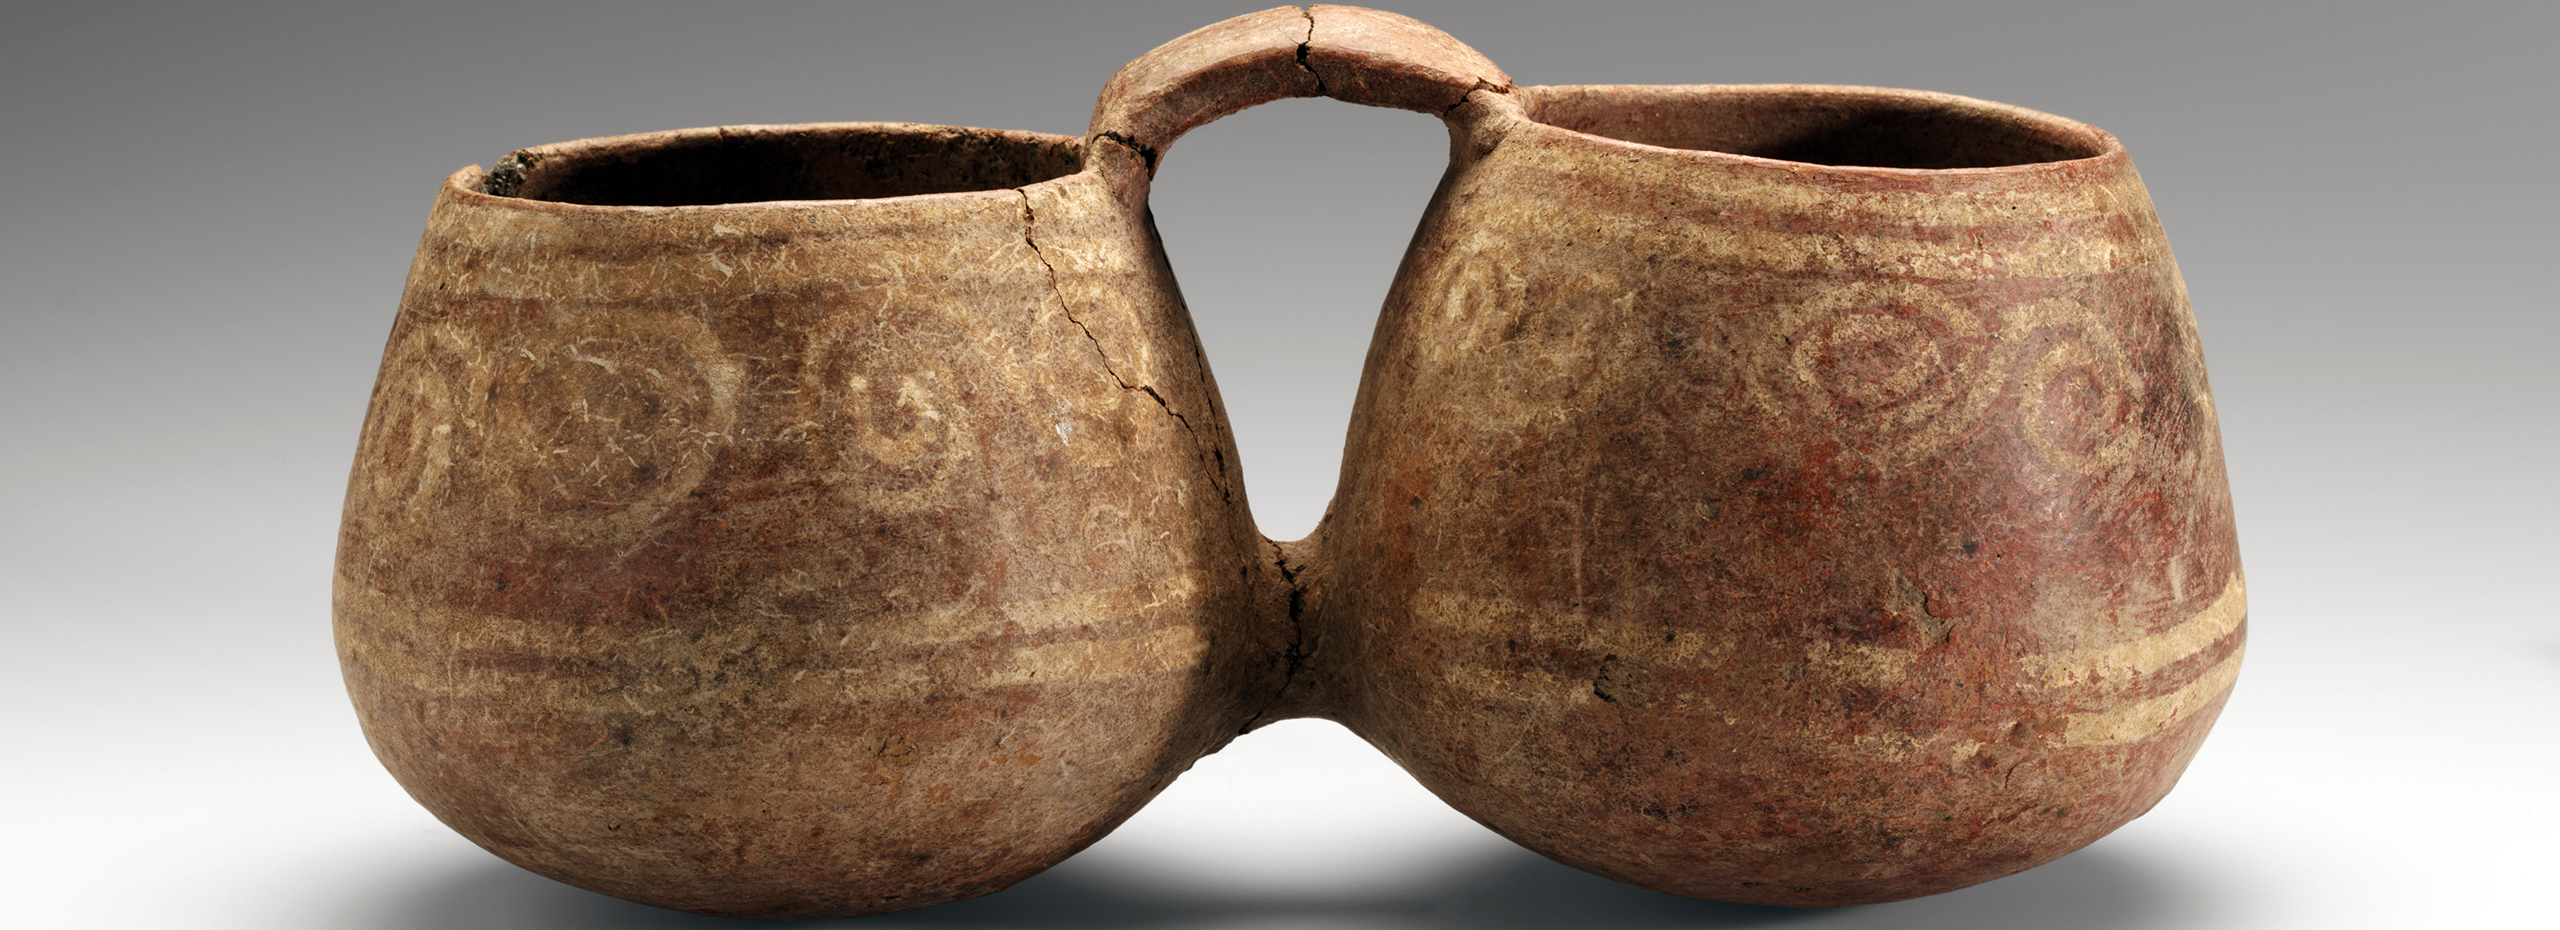 A light brown double-chambered ceramic vessel is painted with reddish stripes and swirls